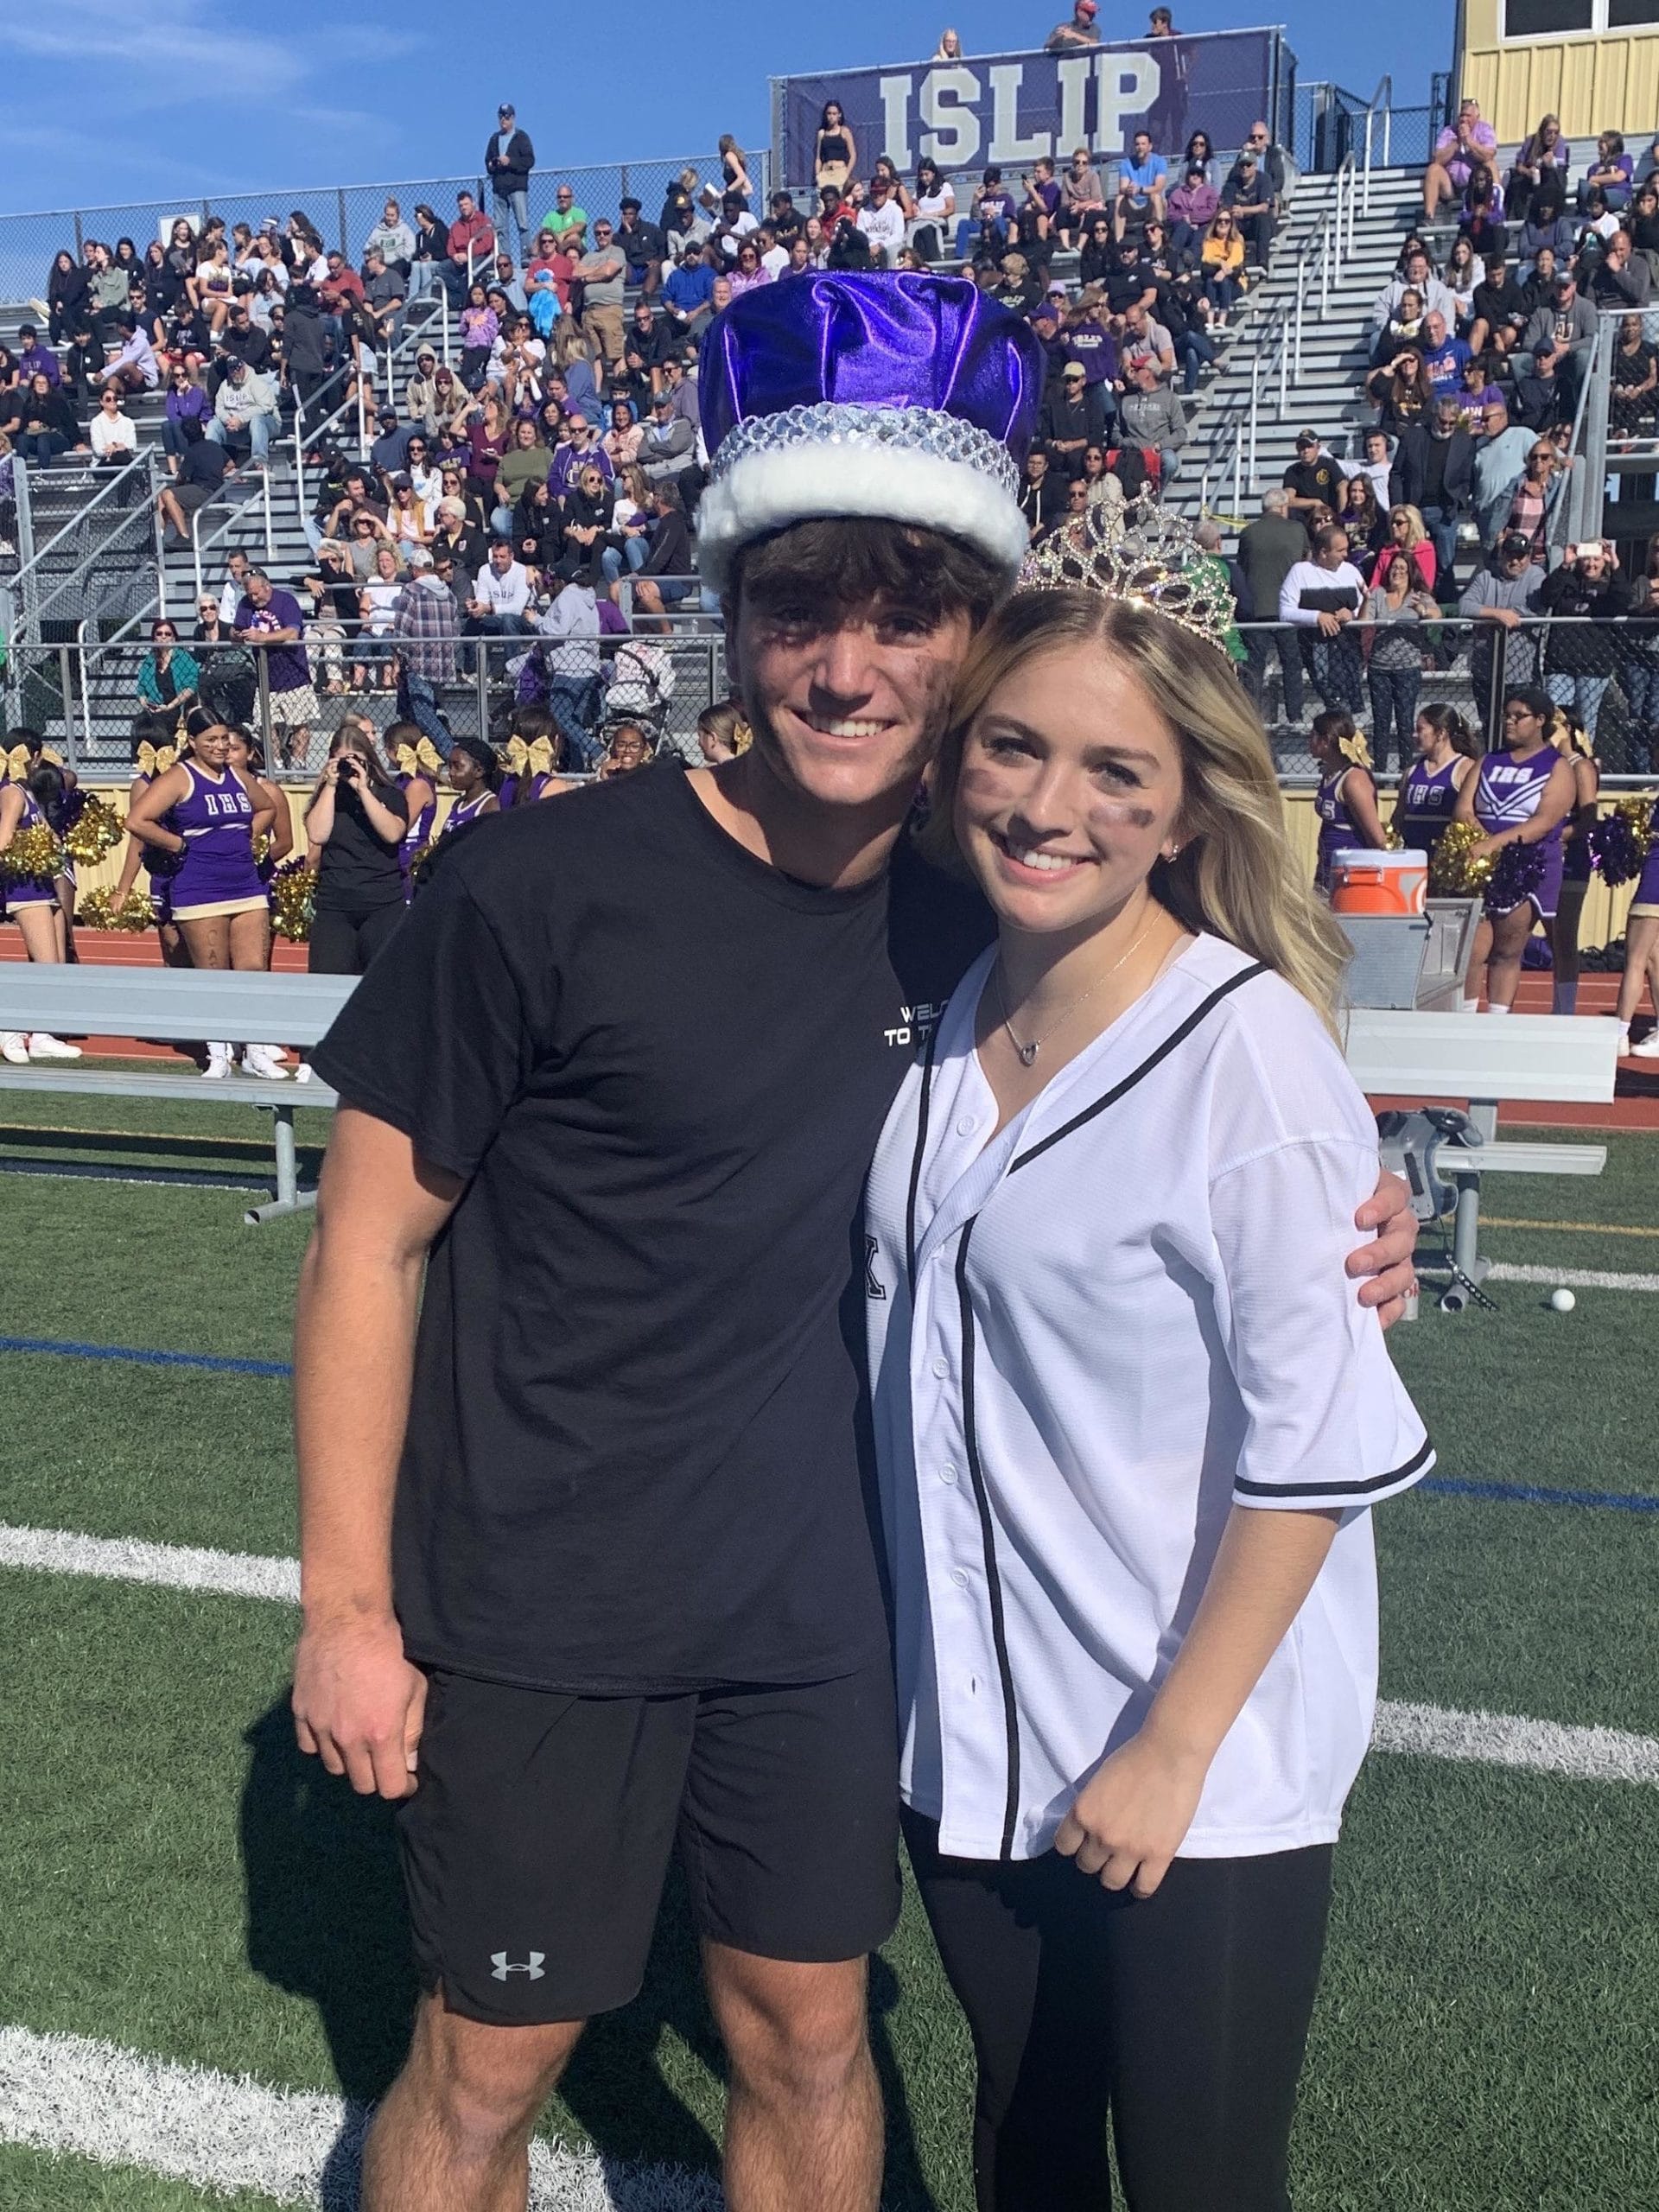 Islip Community Enjoys A Day Of Pride And Fun At Homecoming